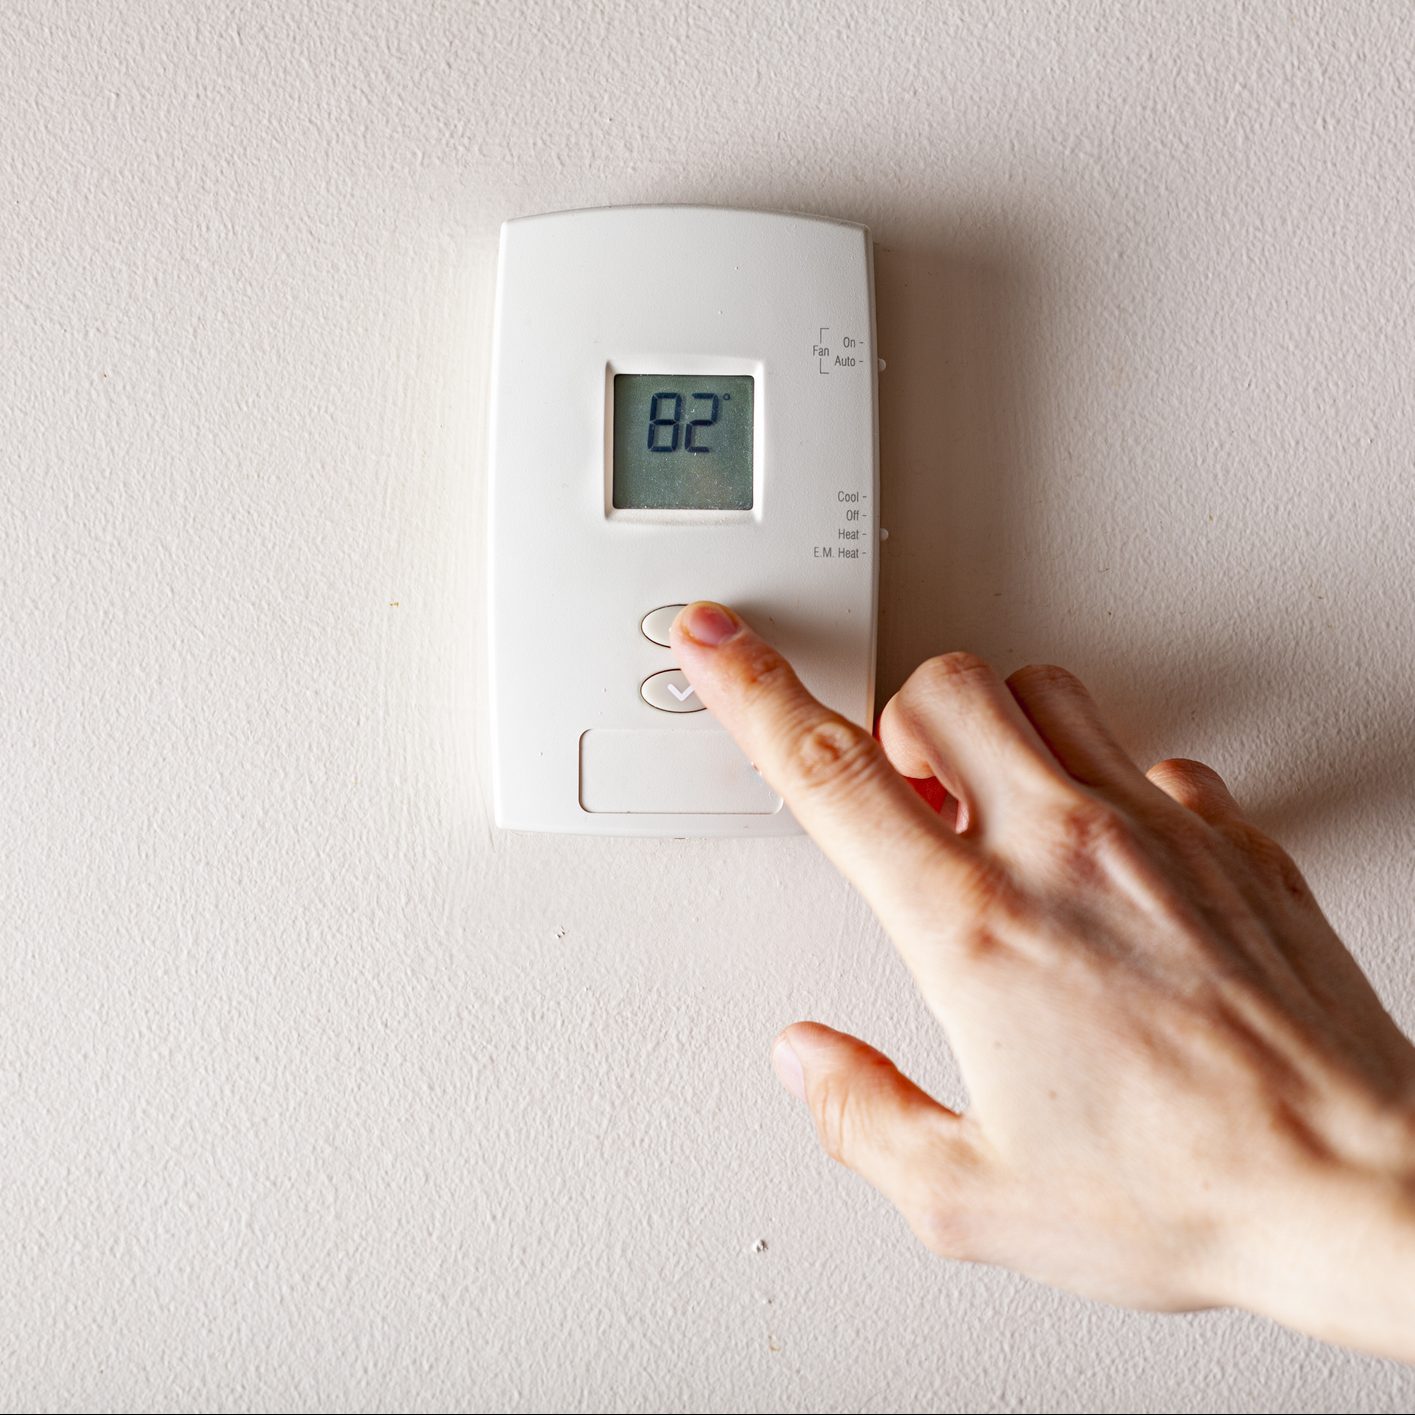 A woman is pressing the up button of a wall attached house thermostat with digital display showing the temperature